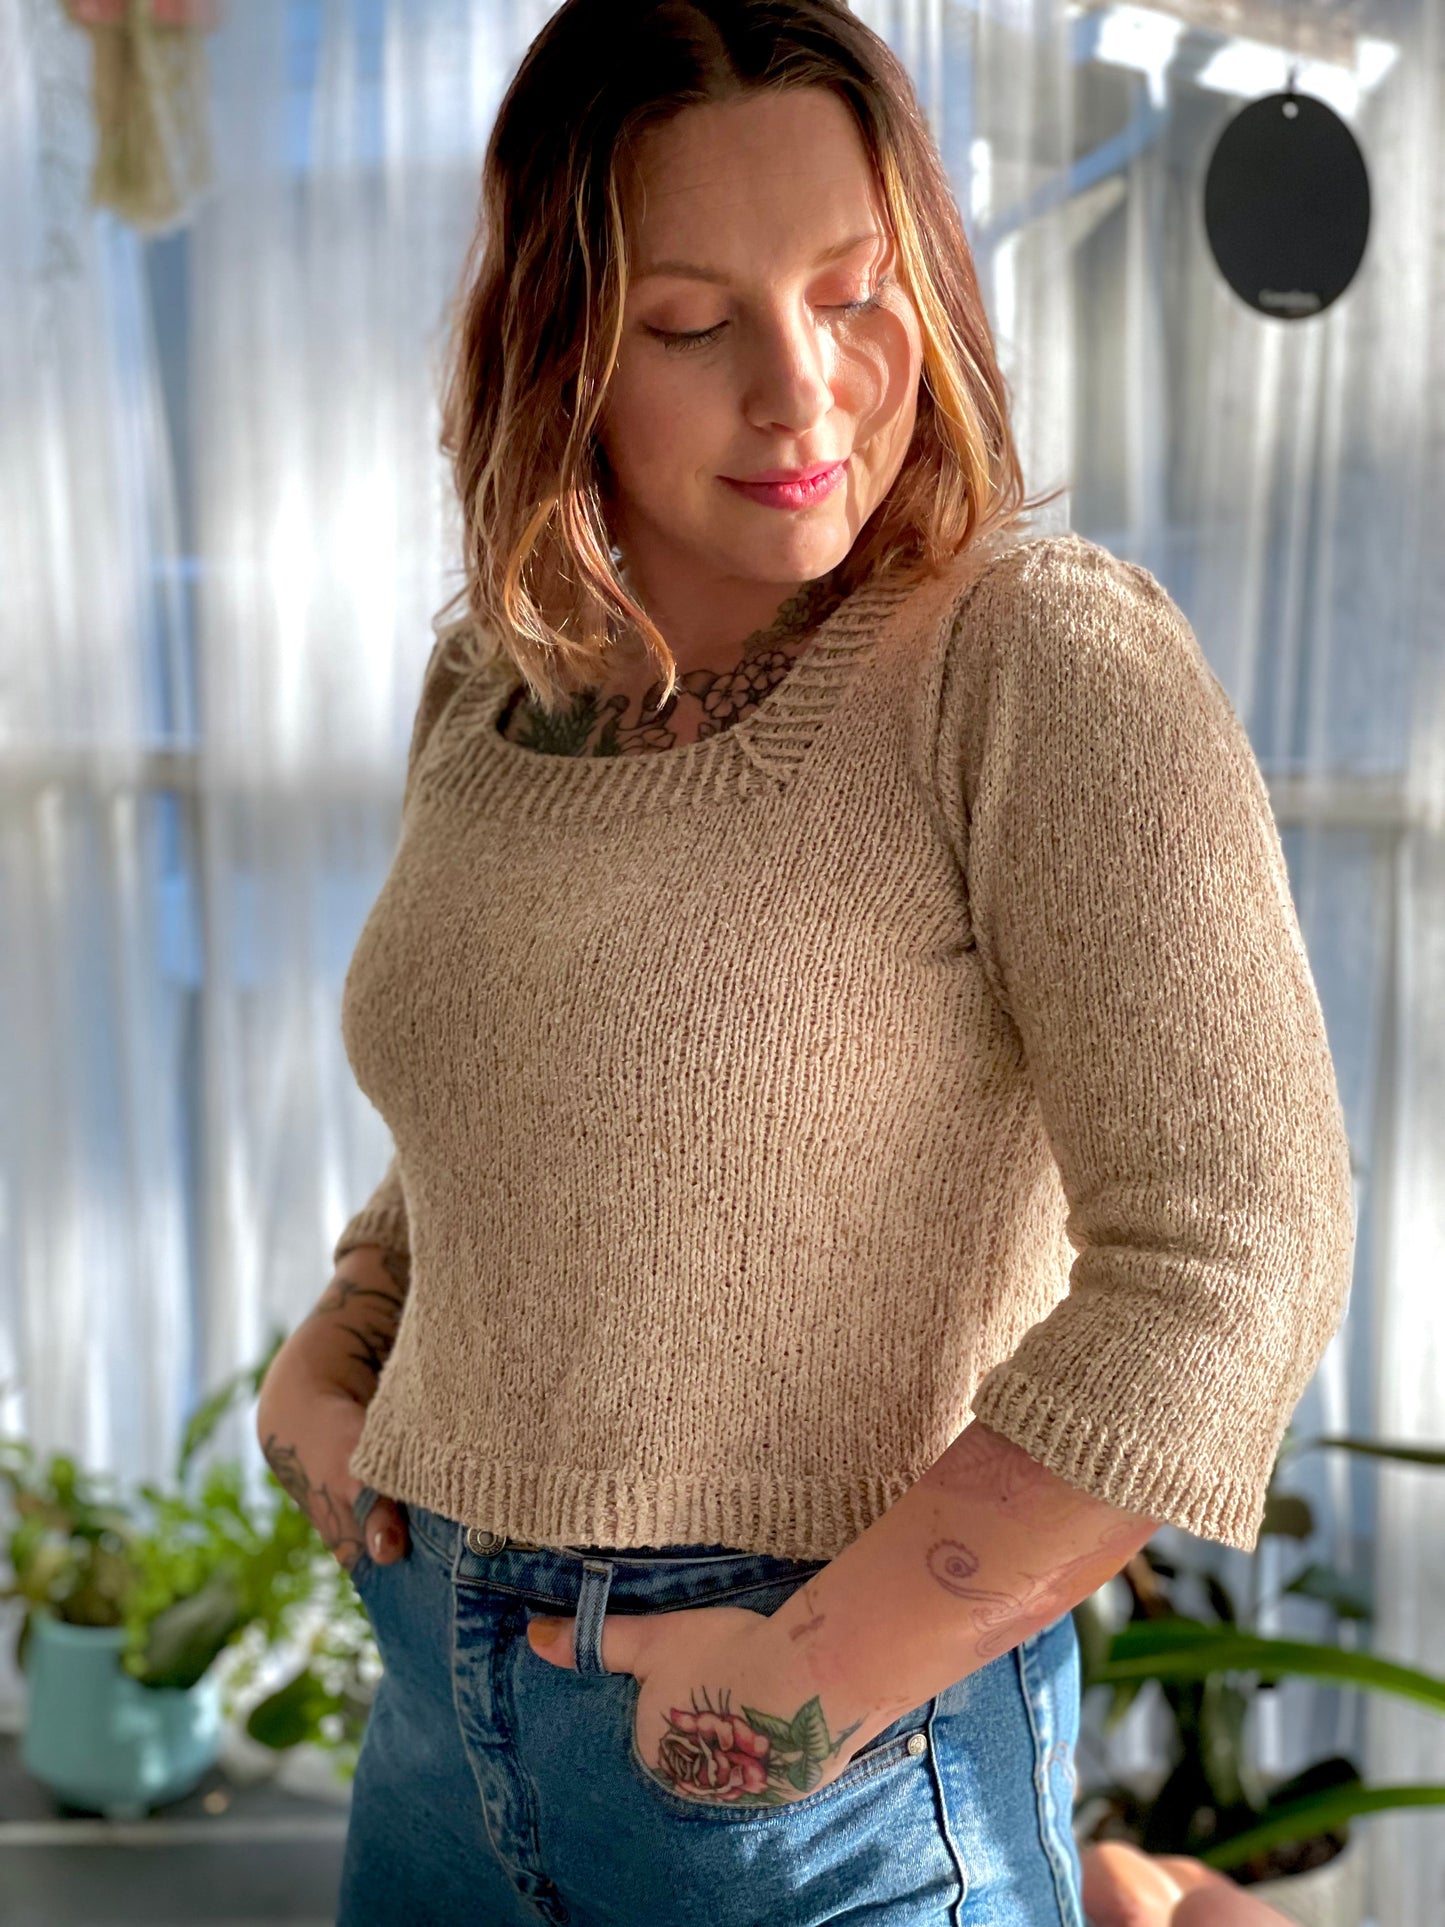 Bess stands, looking off camera. Her light beige sweater is knit with a square neck and 3/4 length sleeves, which she's paired with blue jeans.